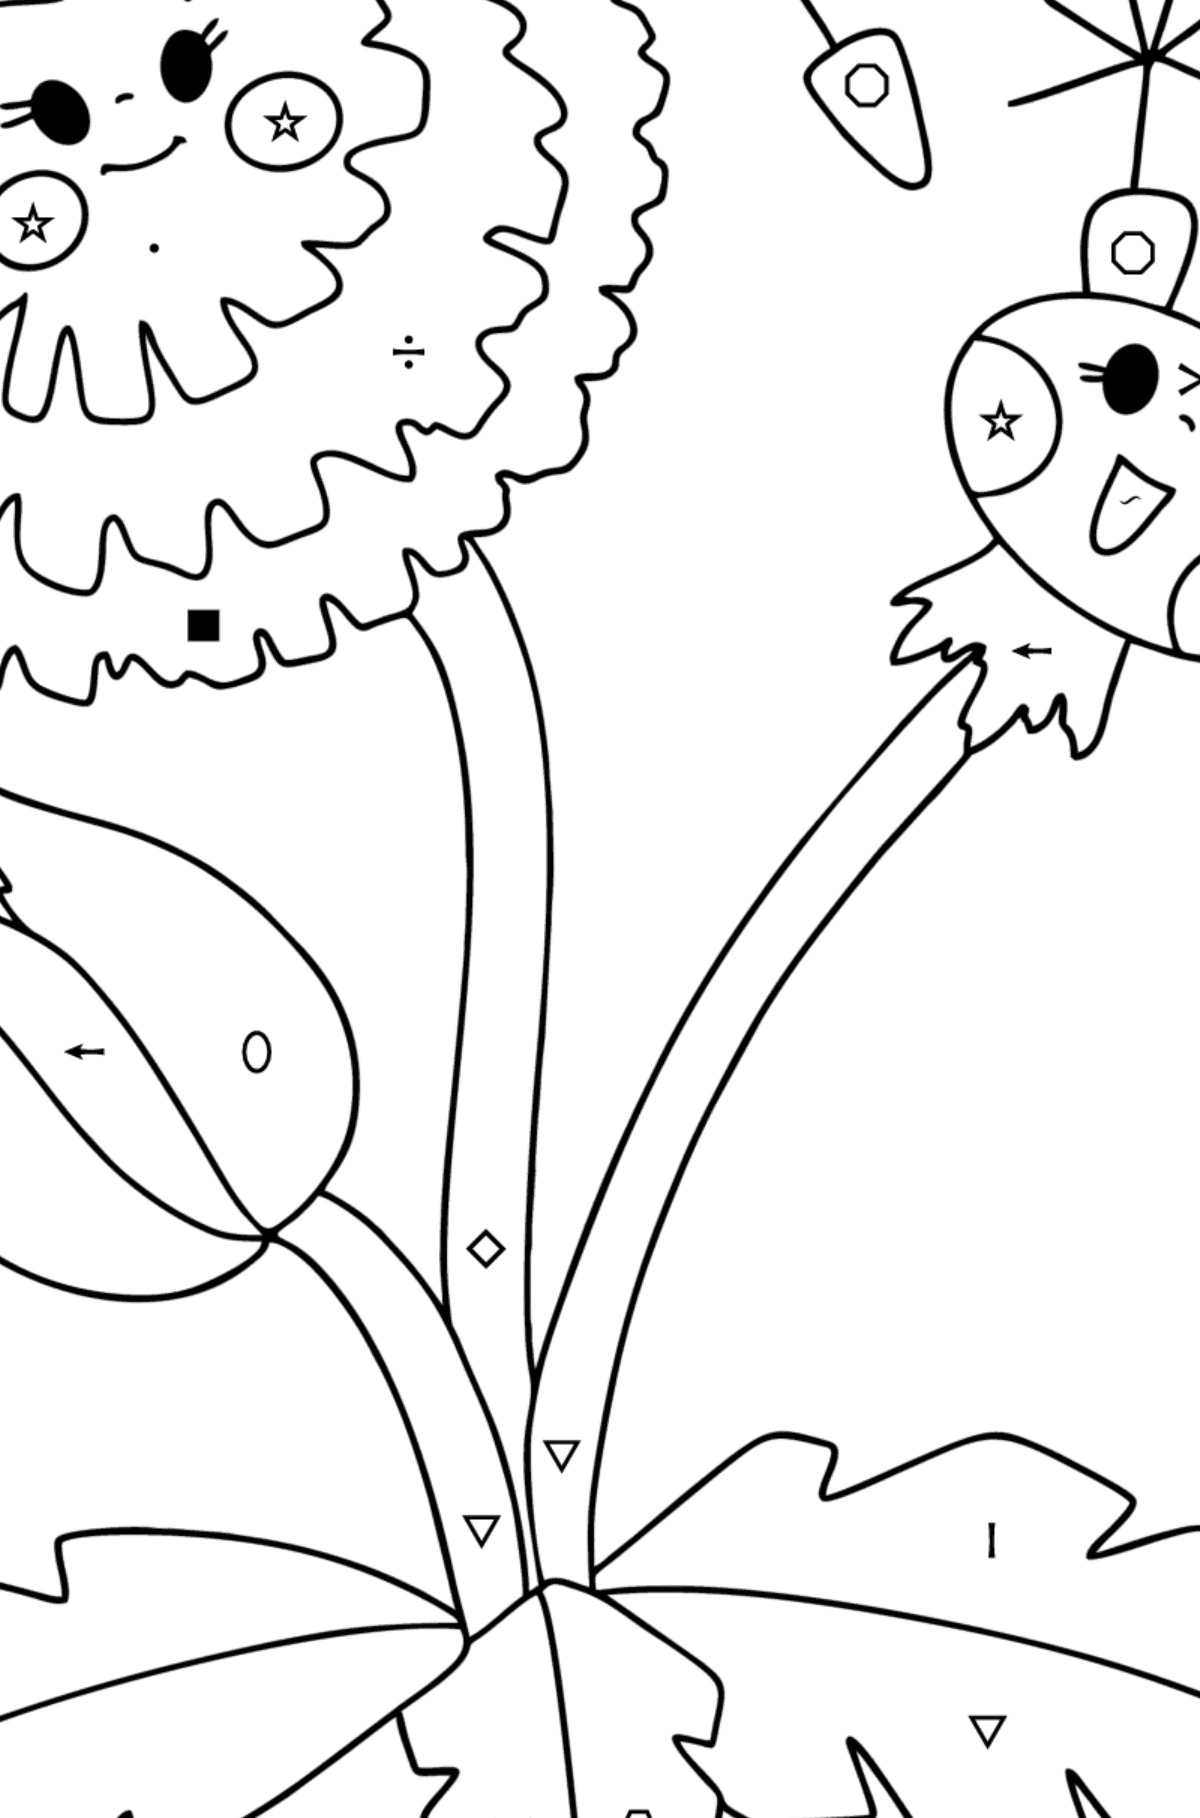 Dandelion with eyes coloring page - Coloring by Symbols and Geometric Shapes for Kids